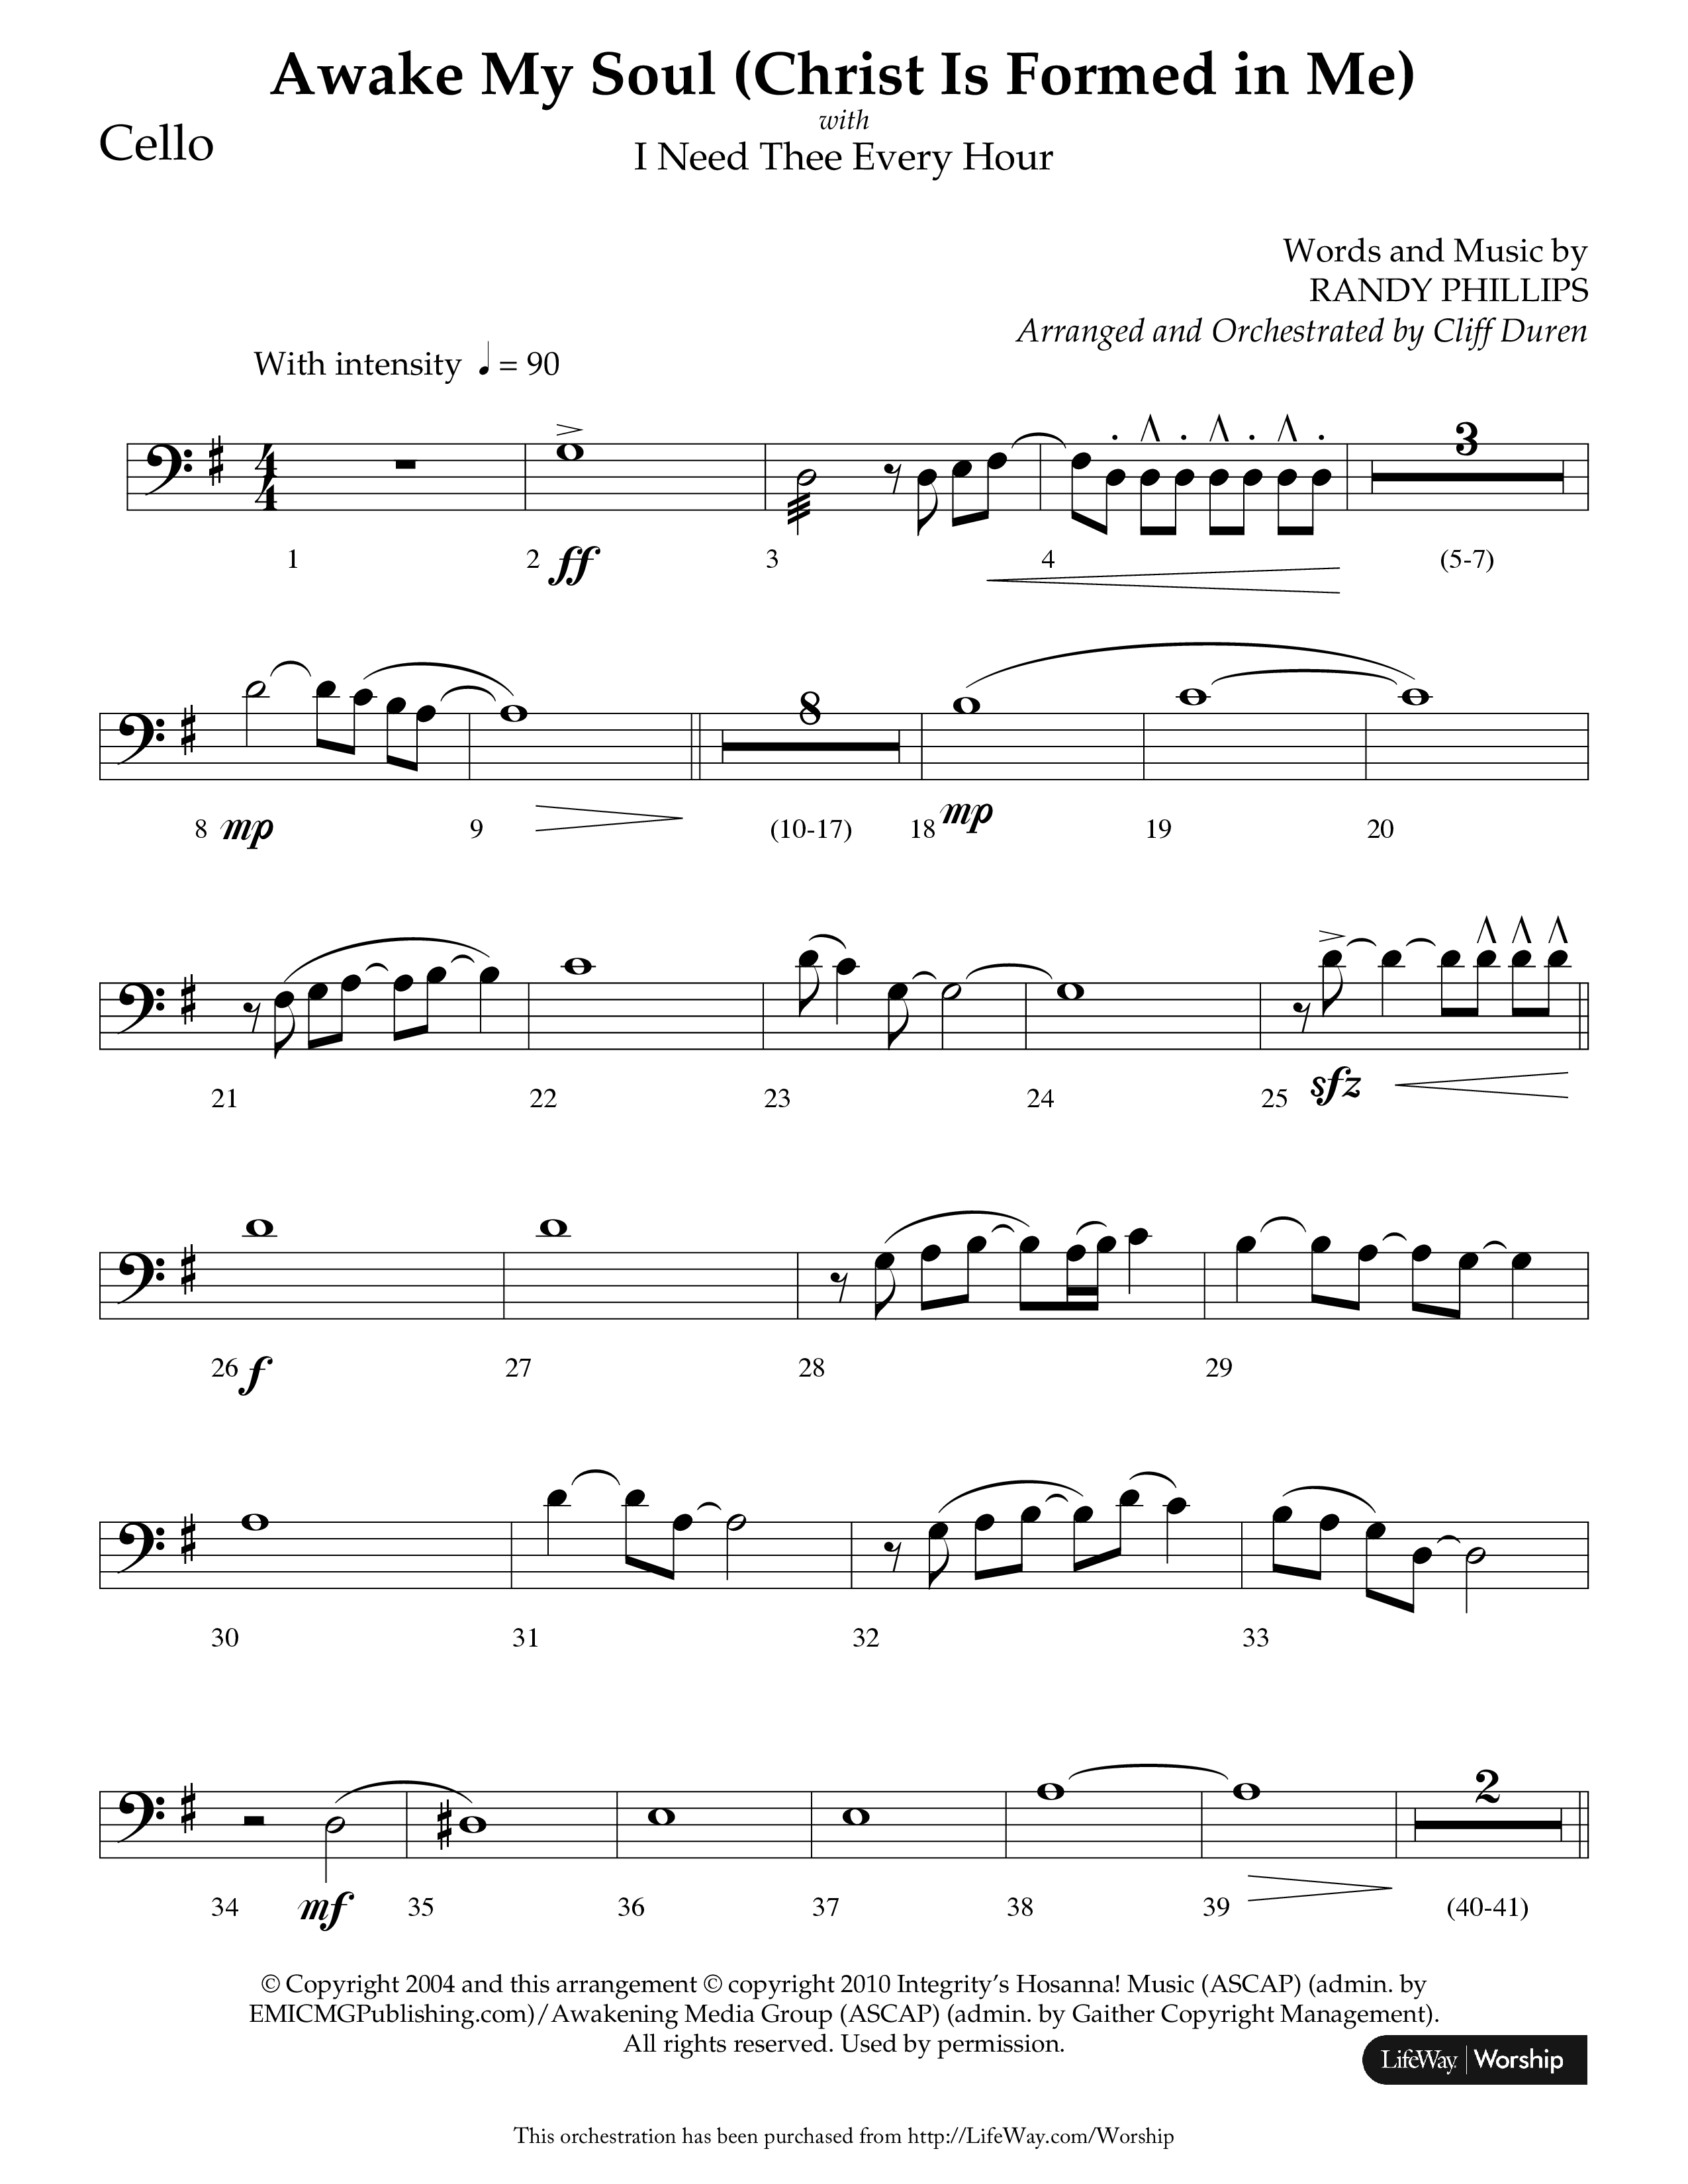 Awake My Soul (Christ Is Formed In Me) with I Need Thee Every Hour (Choral Anthem SATB) Cello (Lifeway Choral / Arr. Cliff Duren)